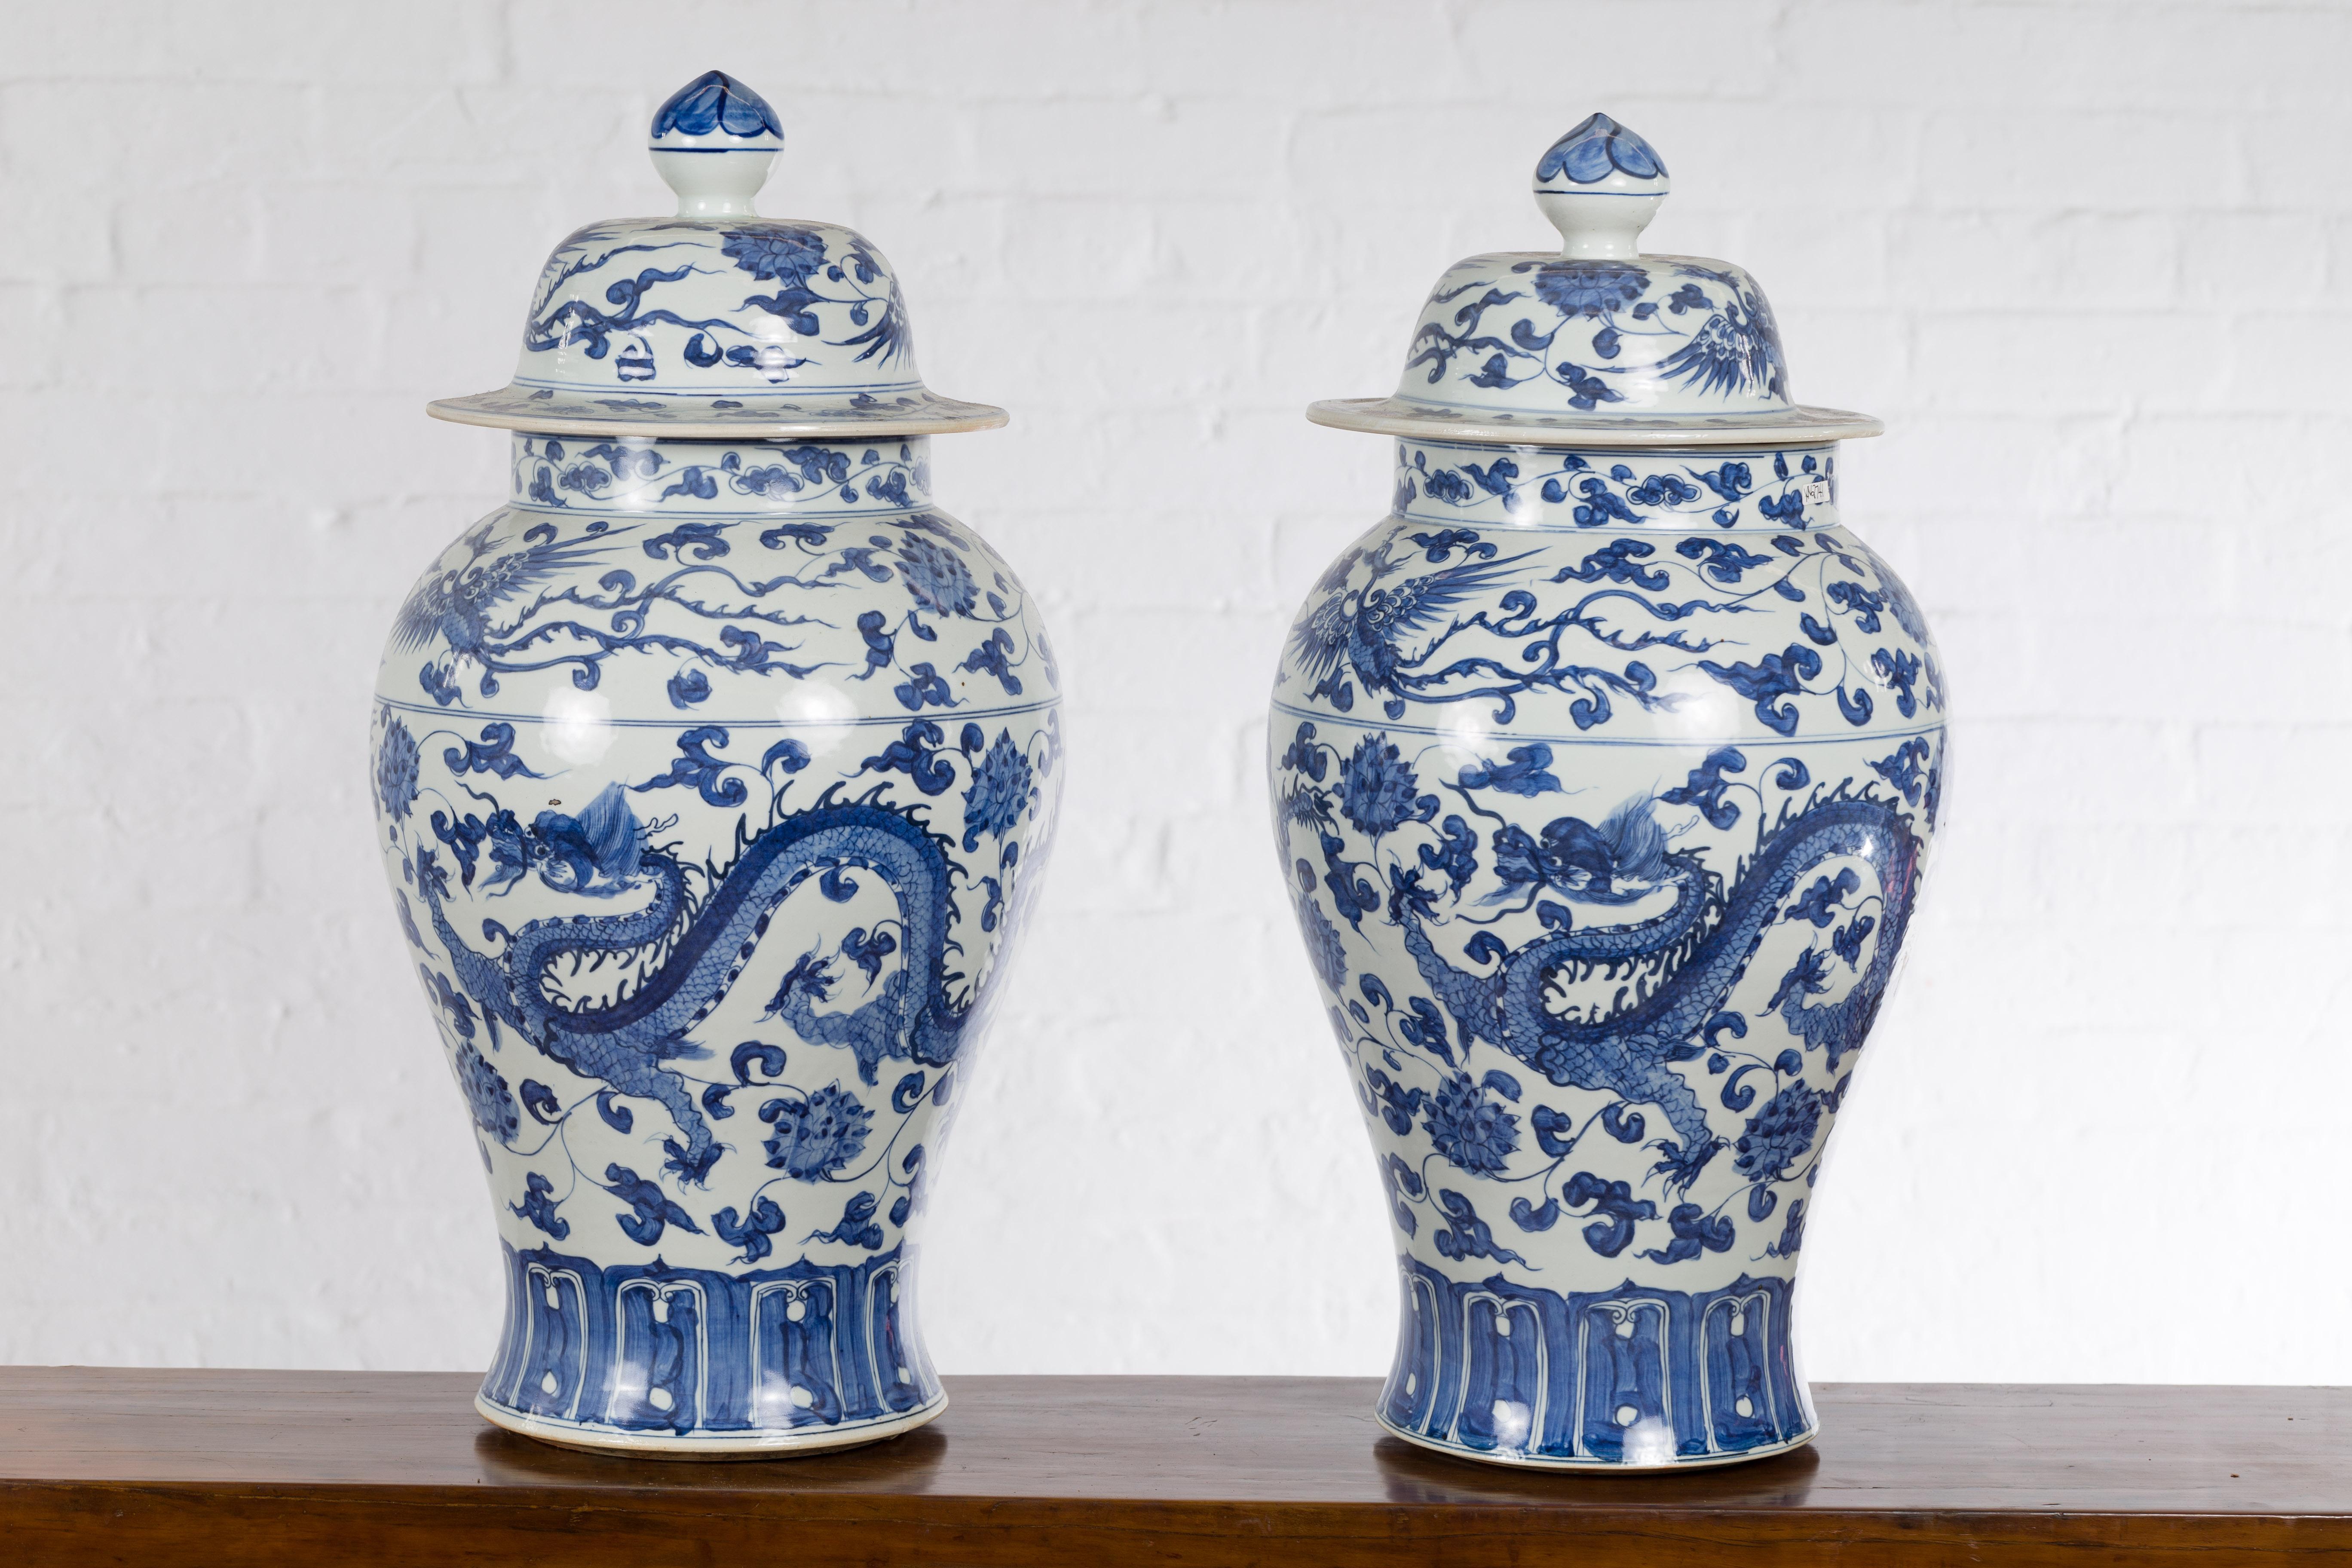 Pair of Vintage Chinese Blue and white Porcelain Lidded Jars with Dragon Motifs 1